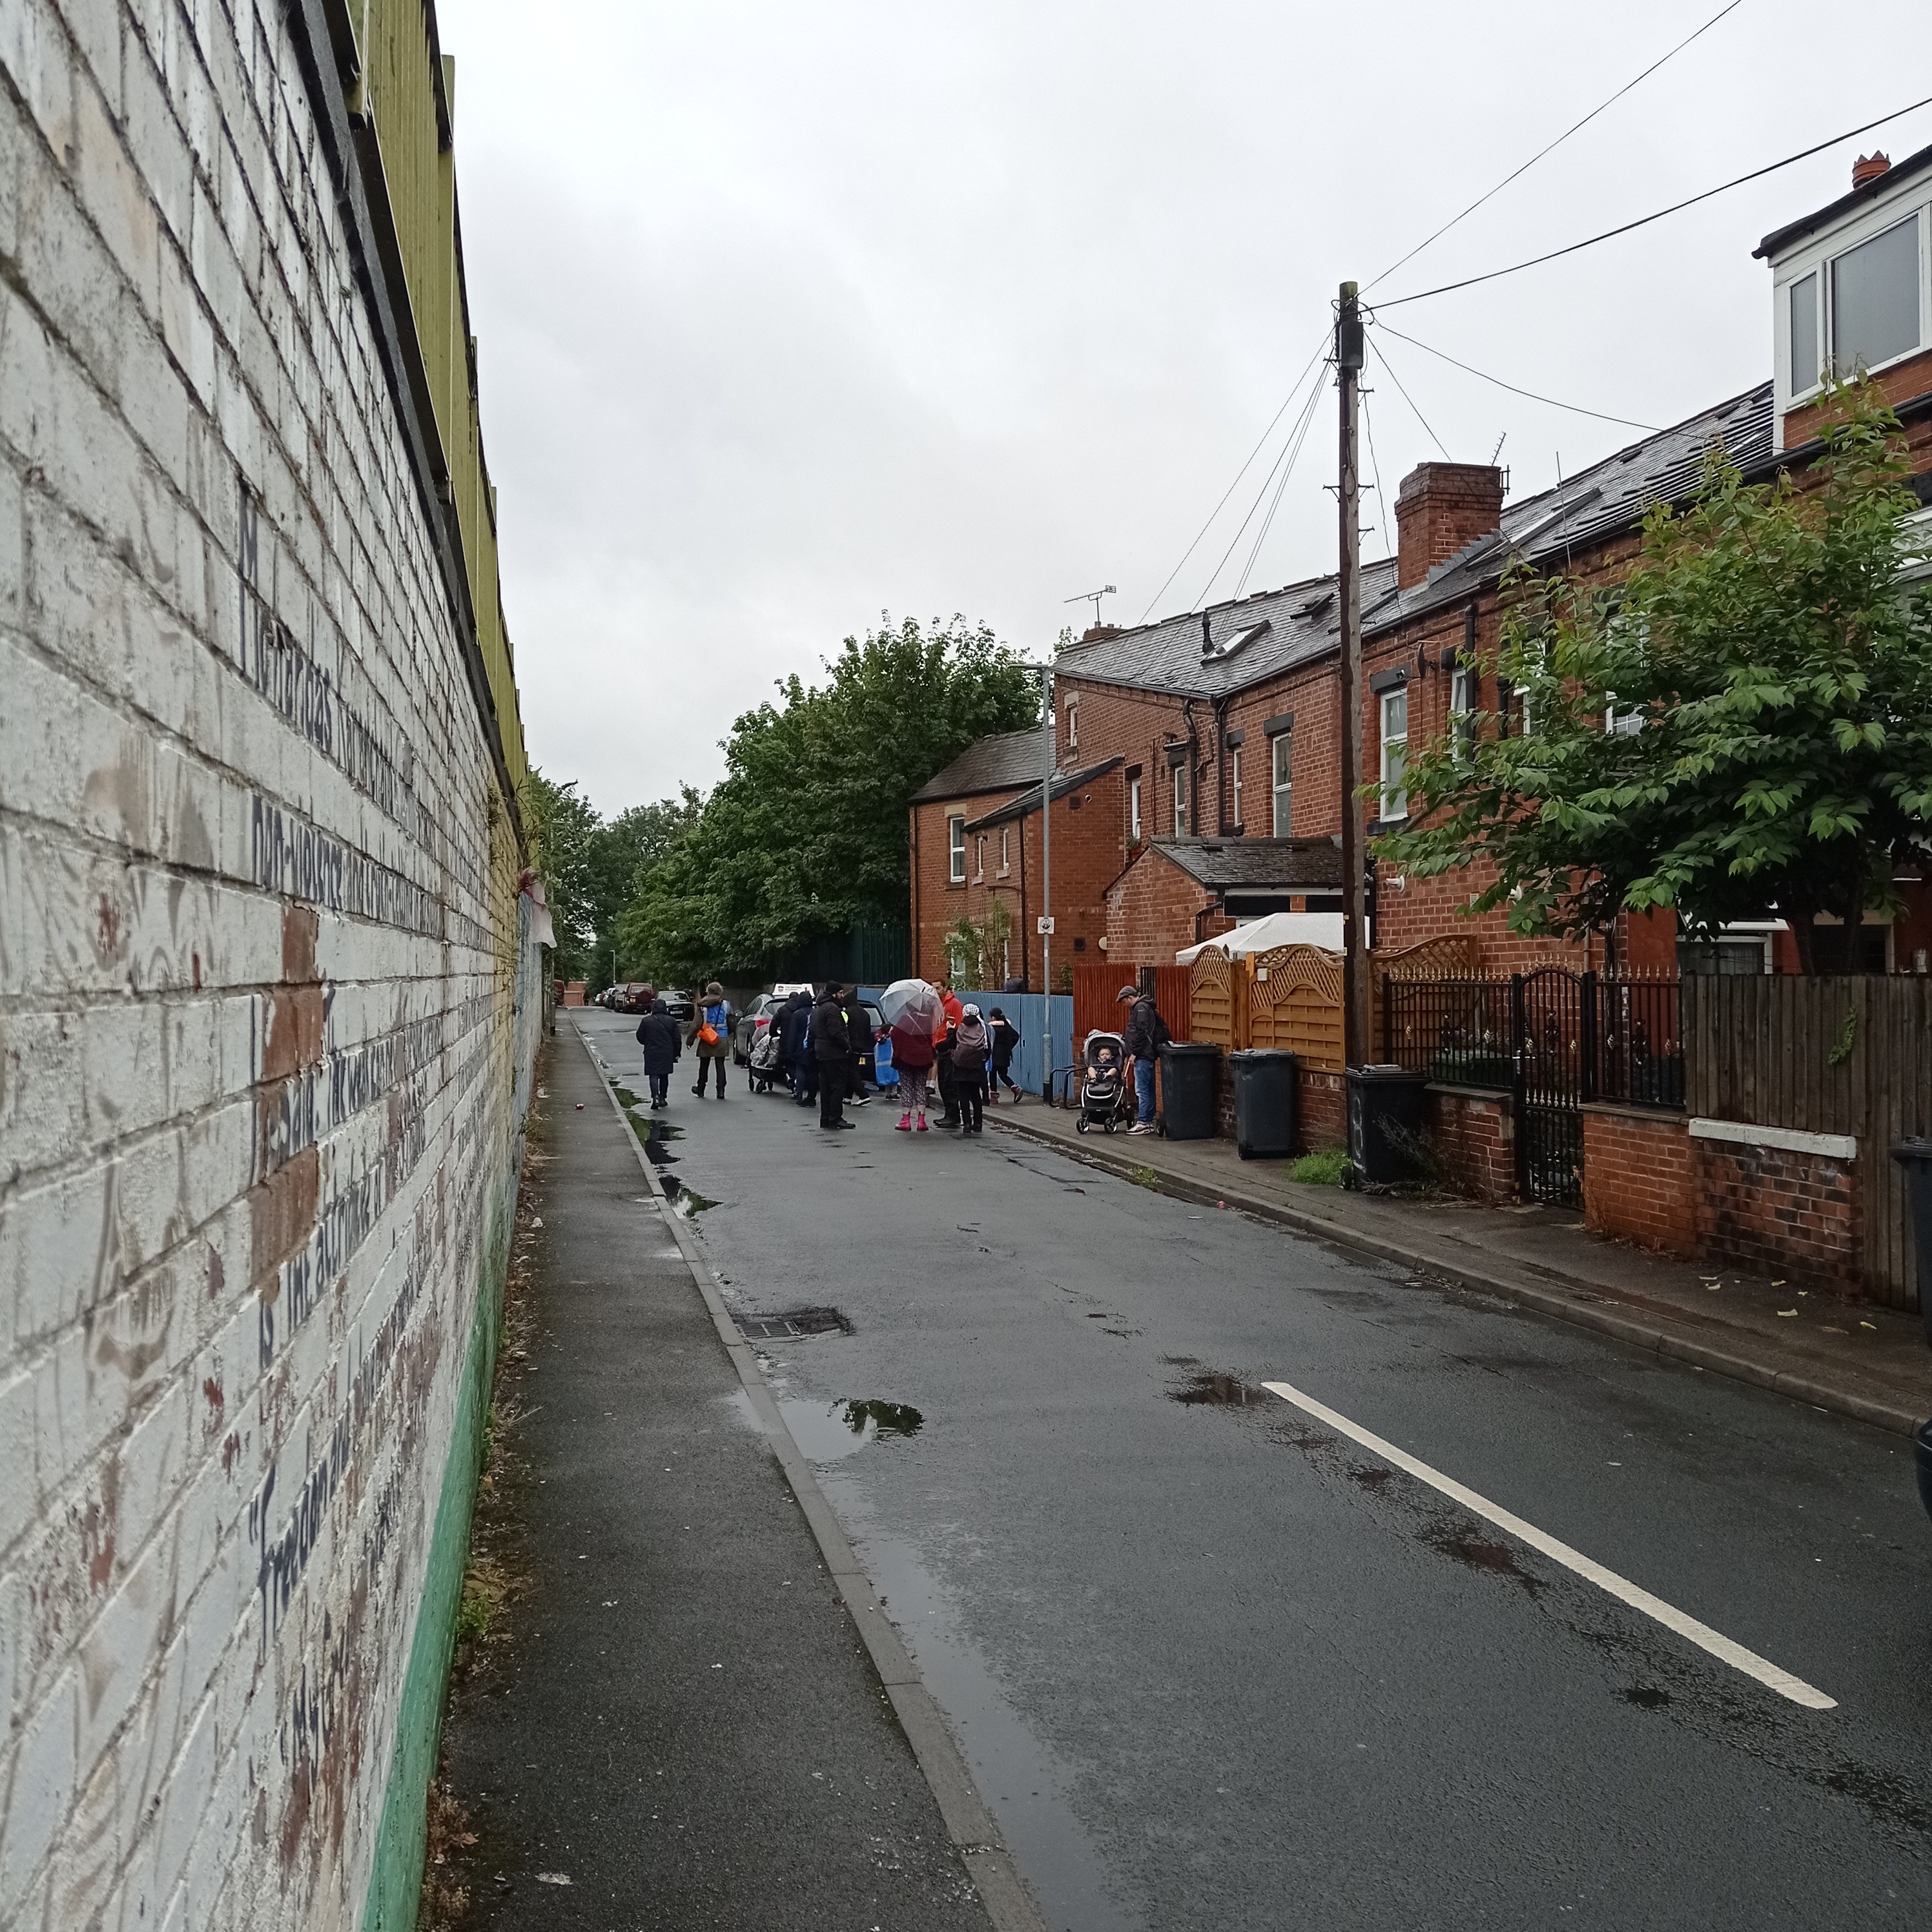 A cluster of people stand at the far end of a long straight back street with the backs of red brick terraced houses on one side and a white-painted brick wall on the other.